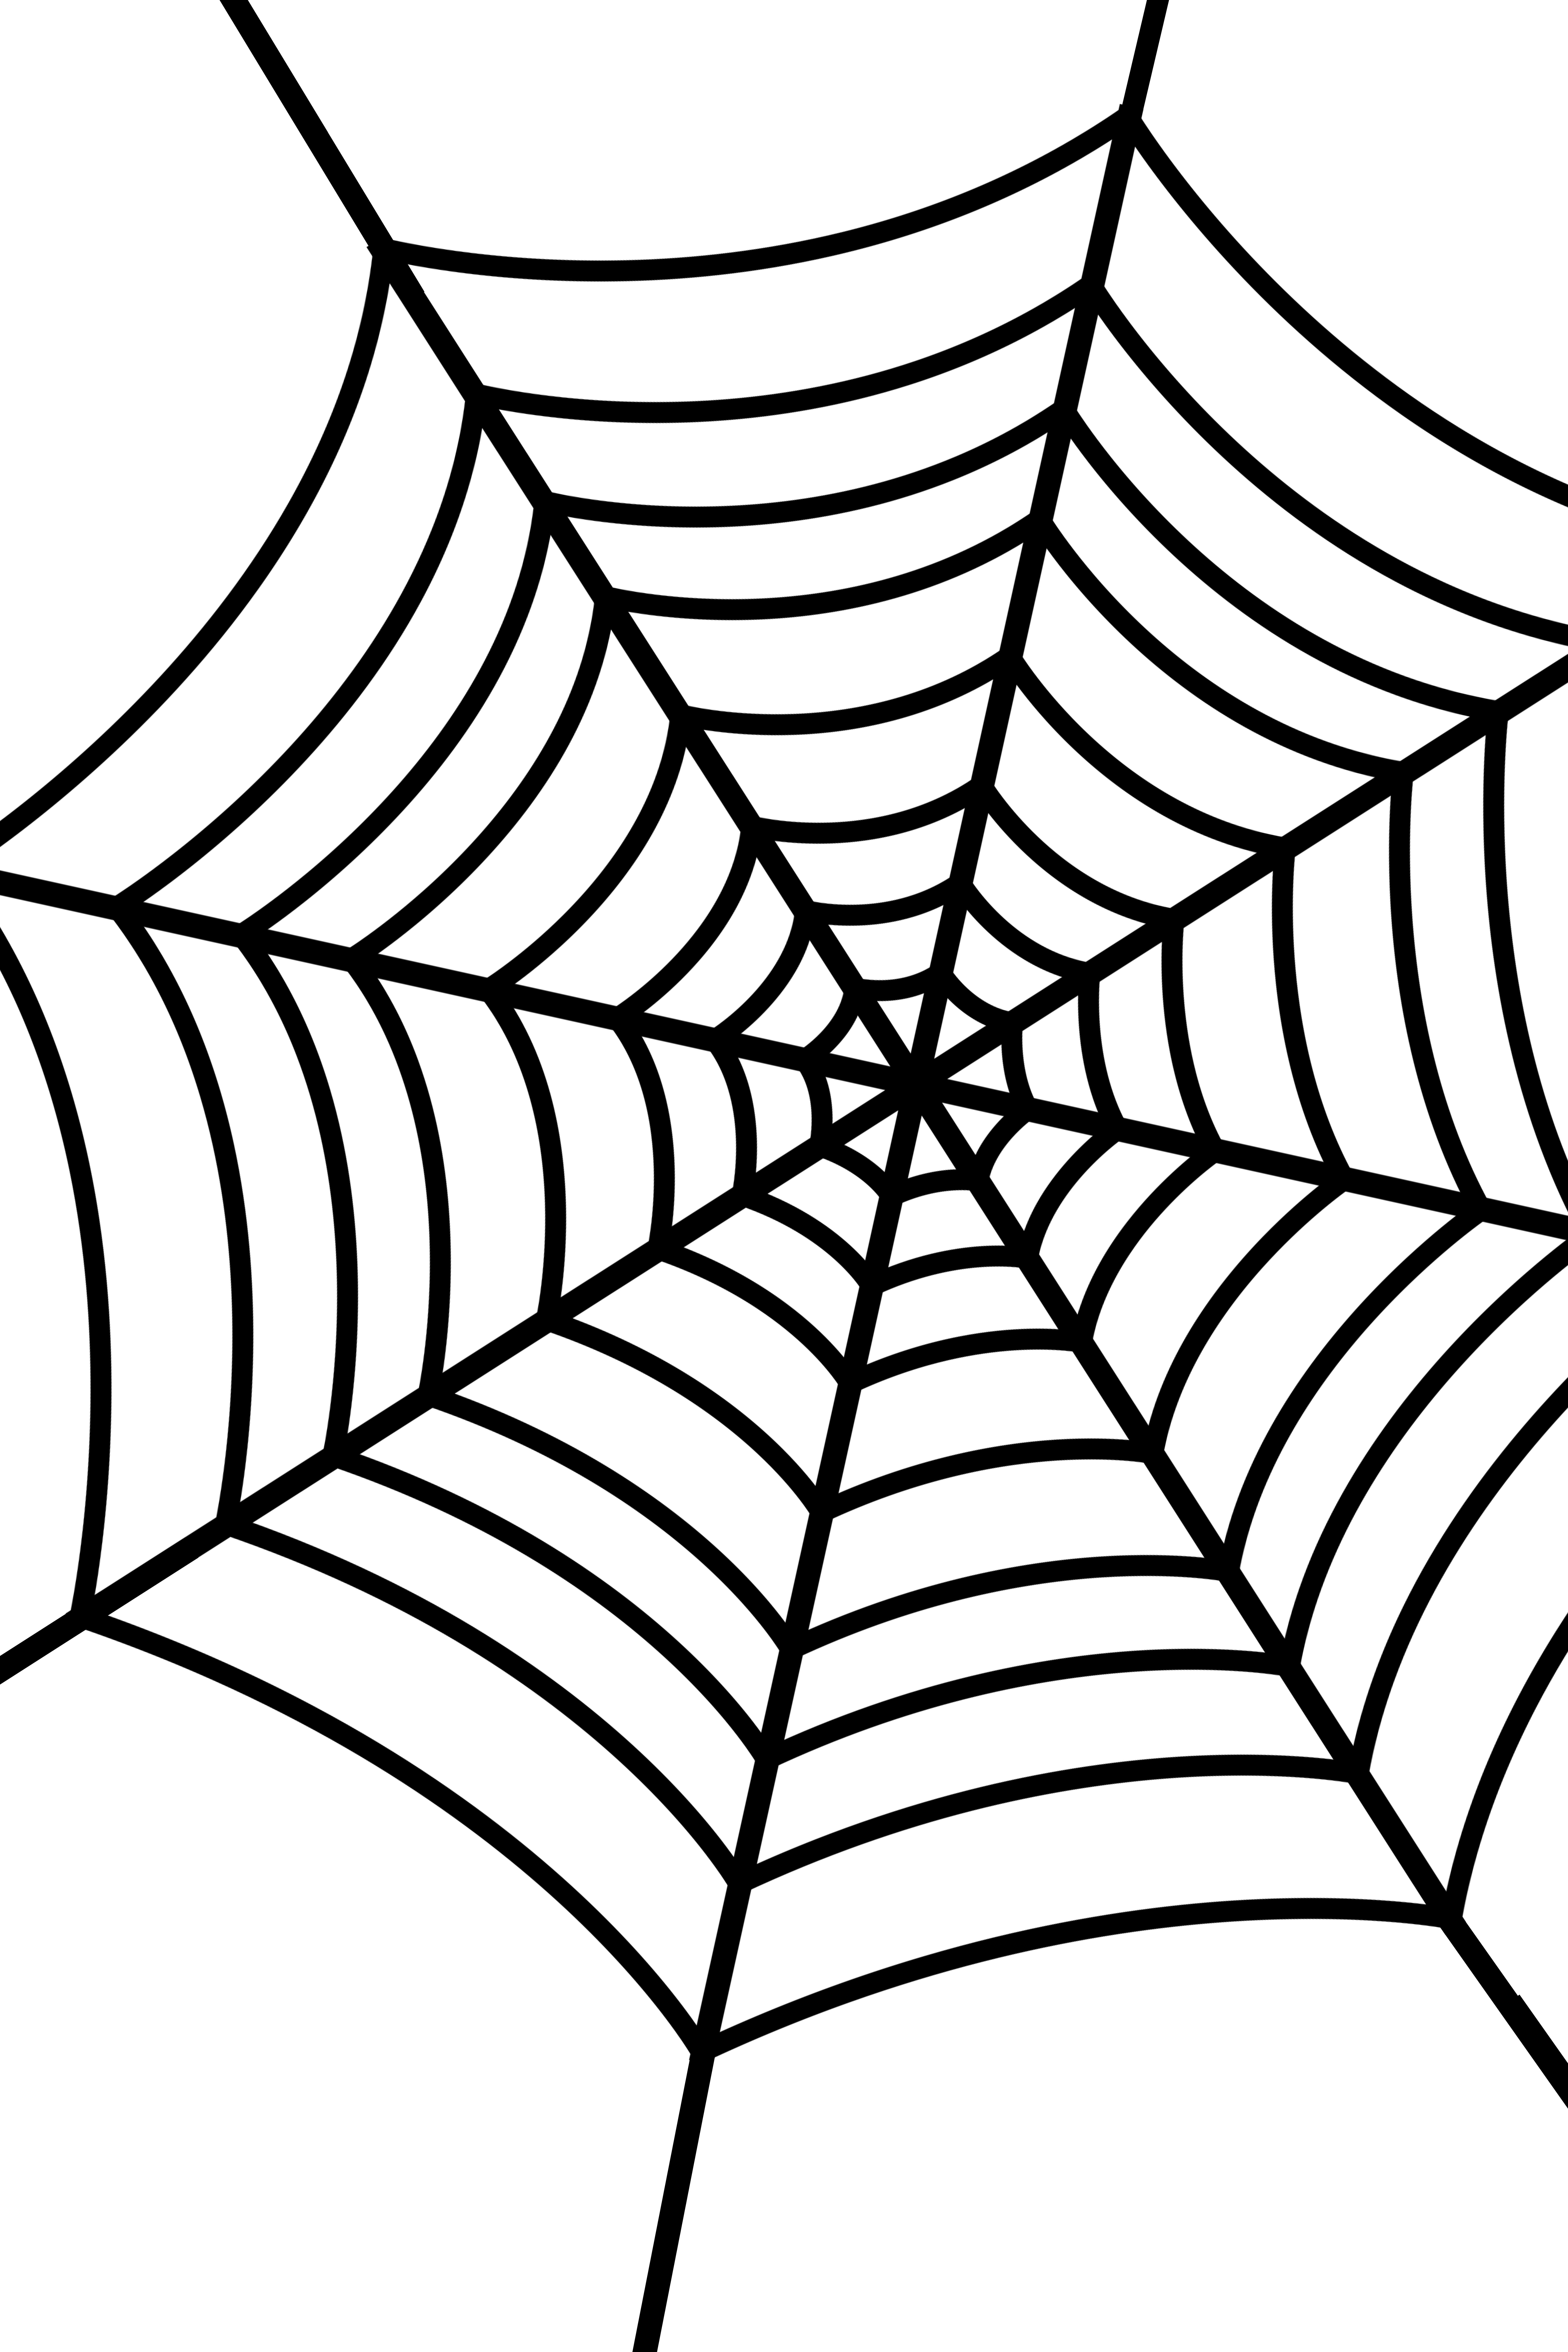 Simple Spider Web Drawing at GetDrawings.com | Free for personal use ...